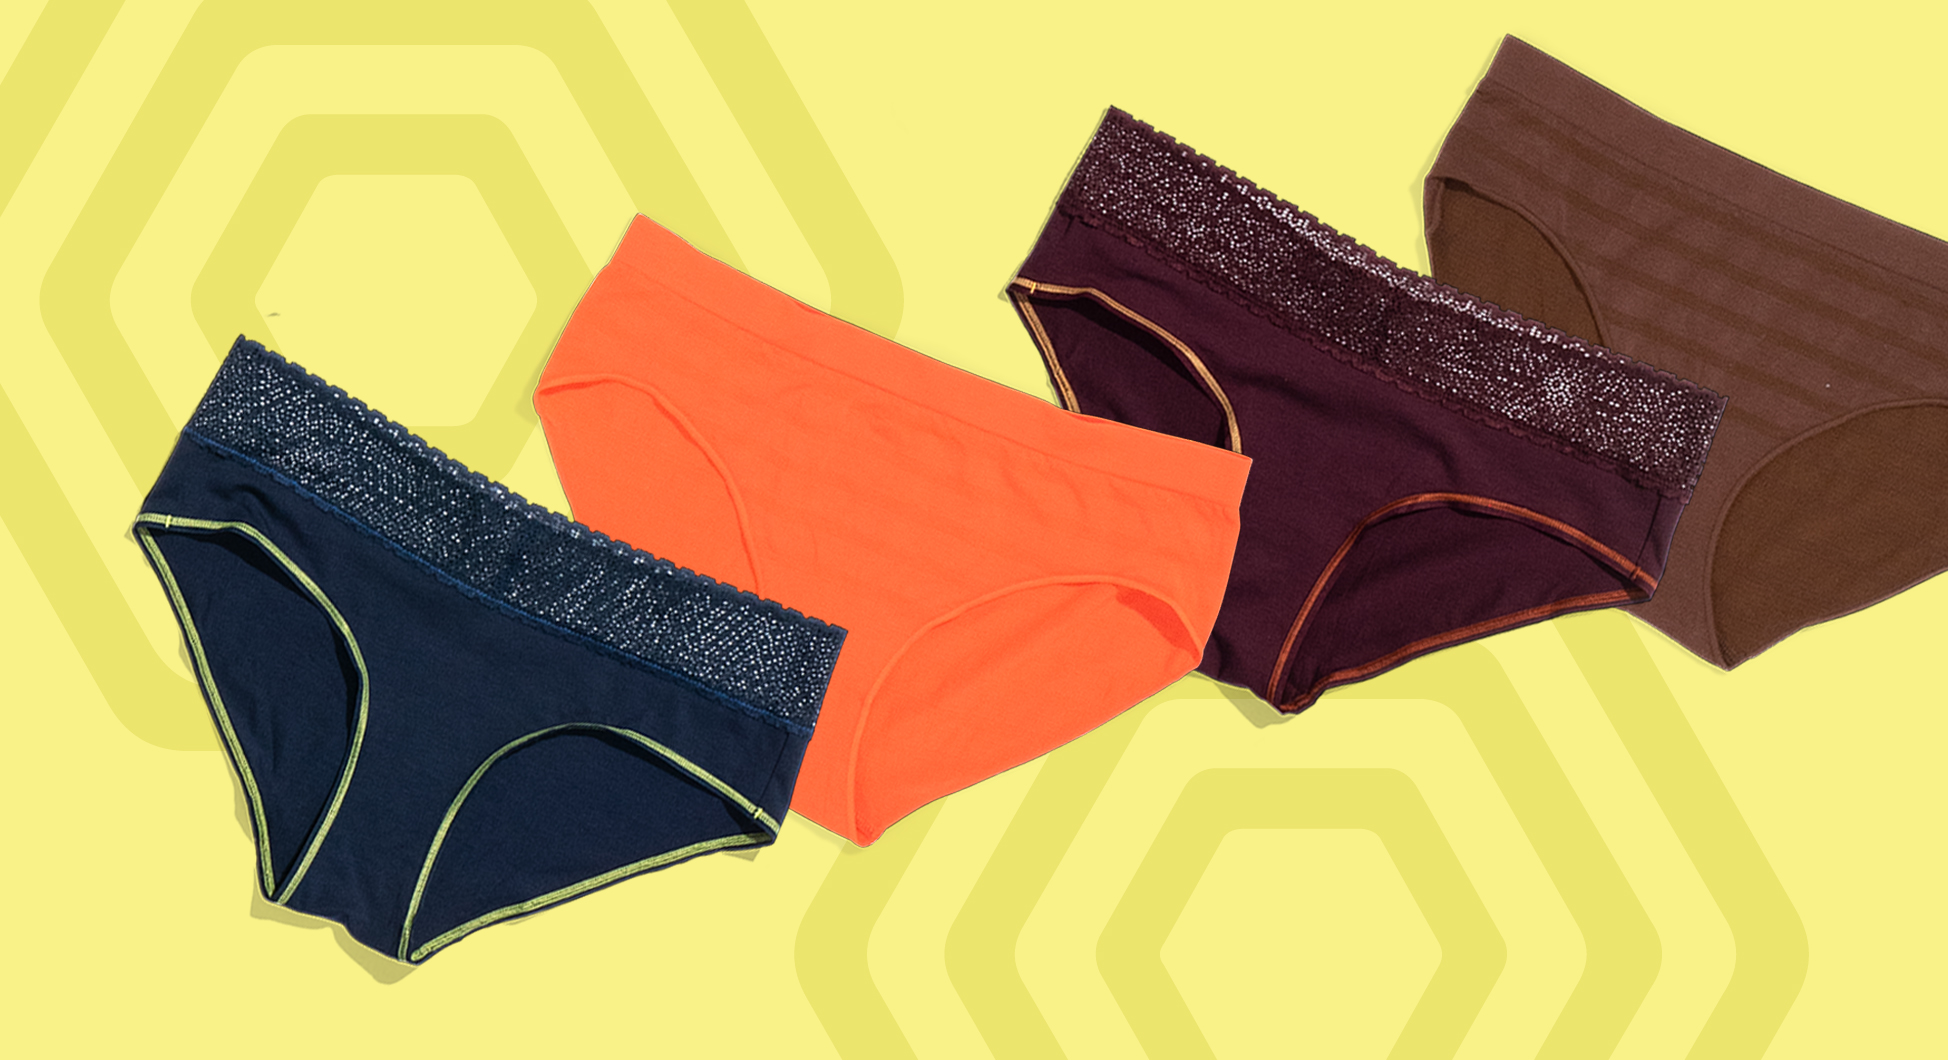 Bombas on X: Introducing our newest creation: Bombas Underwear